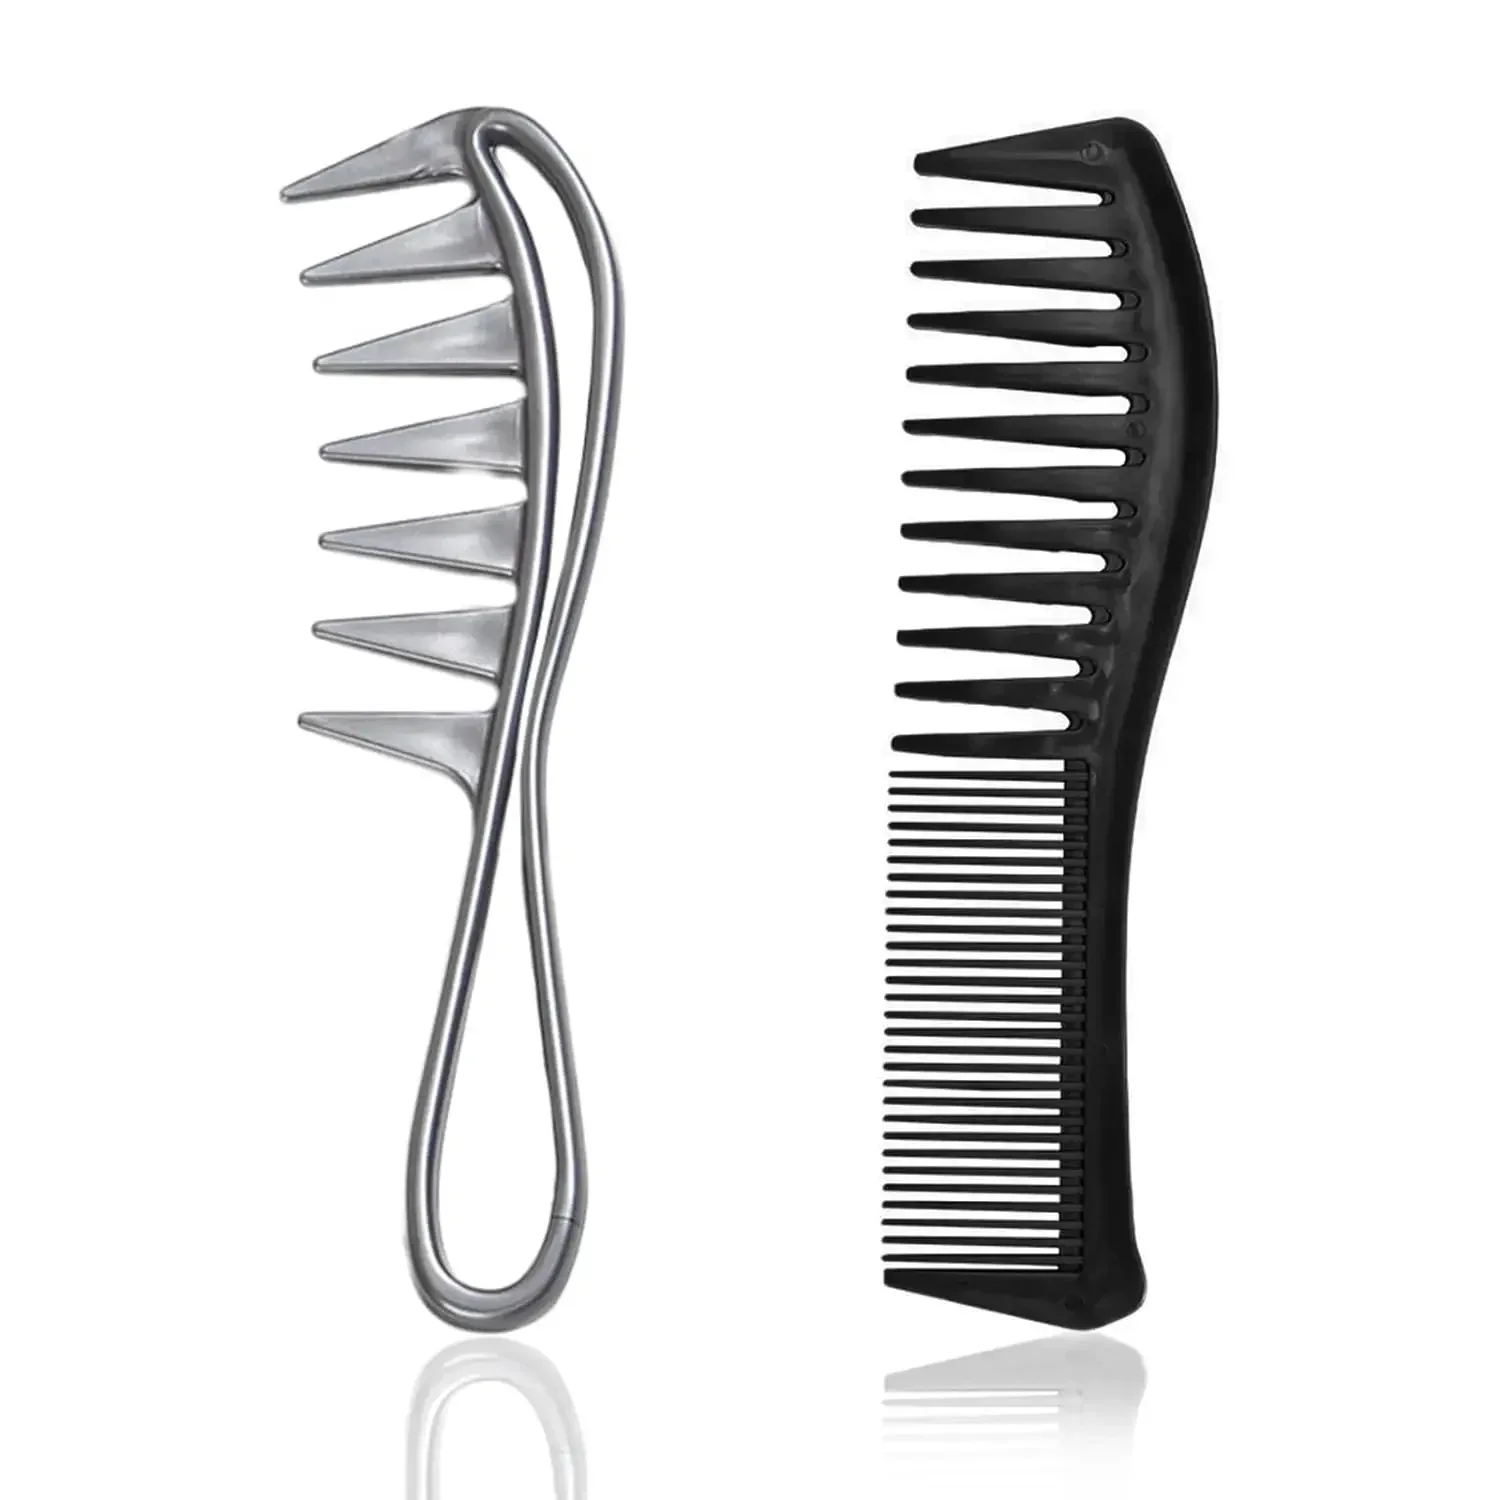 

2Pcs Wide Tooth Comb Large Combs Hairstyle Shark Teeth Detangling Curly Wet Wavy Thick Hair Wigs Barber Salon Women Men